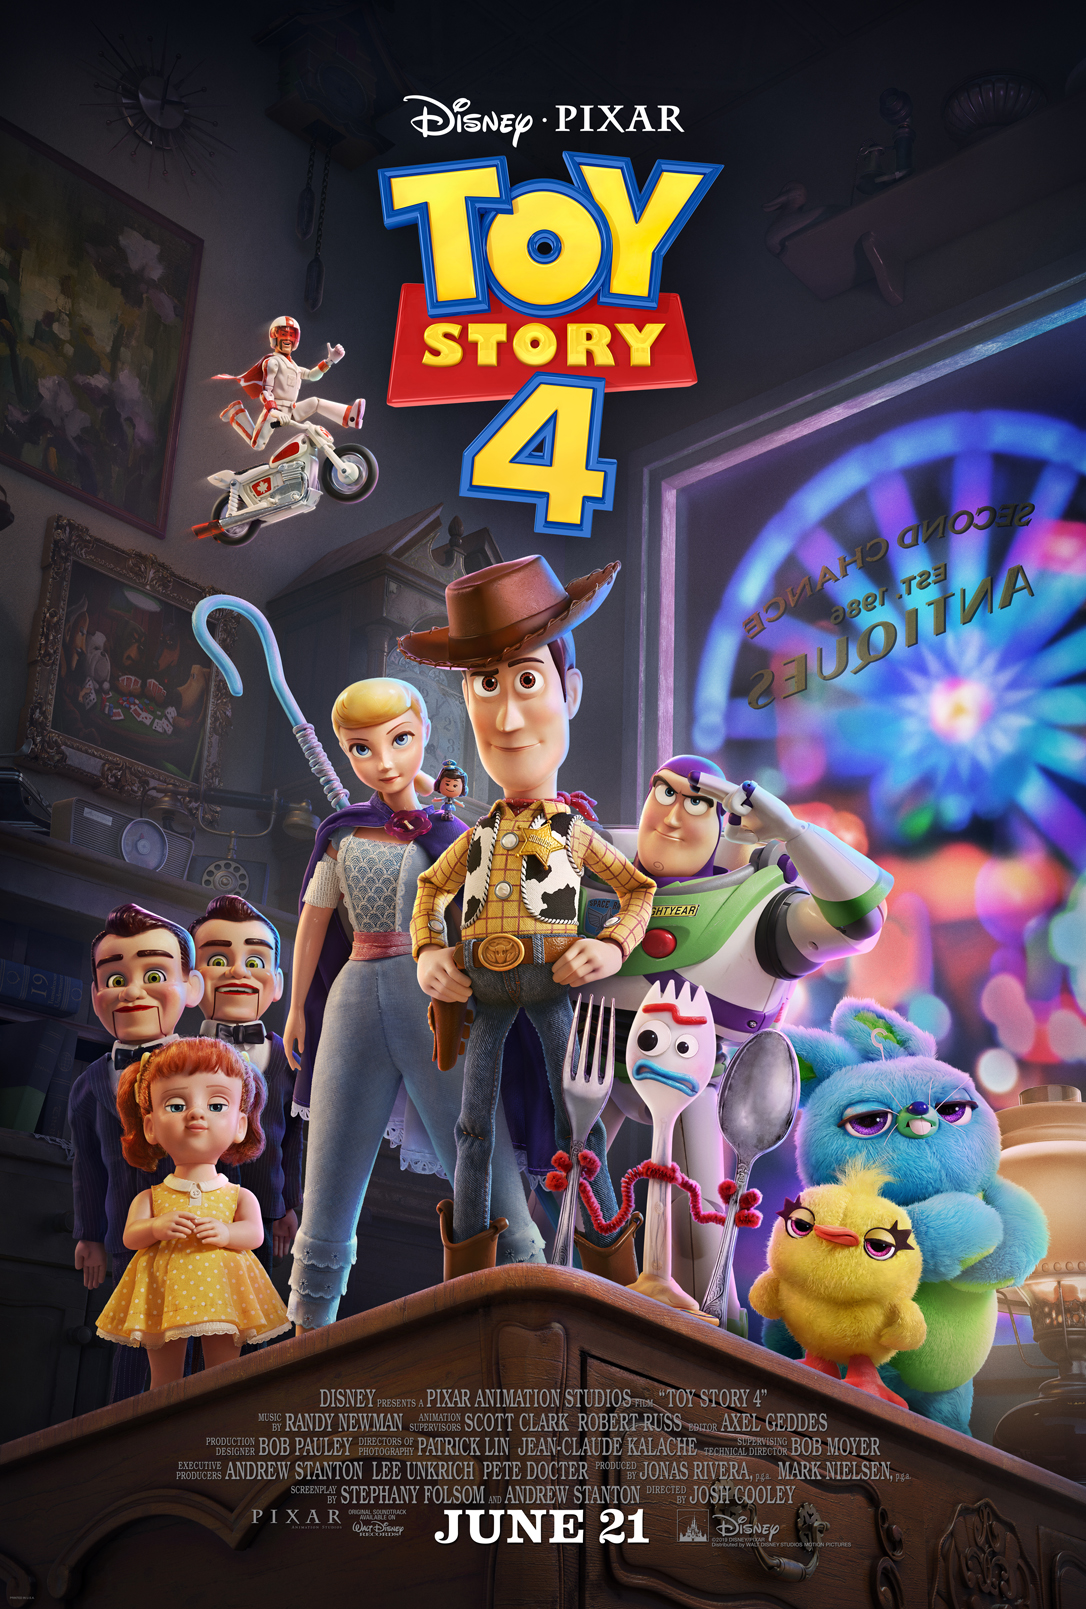 [News] TOY STORY 4 Trailer Reveals Brand New Characters